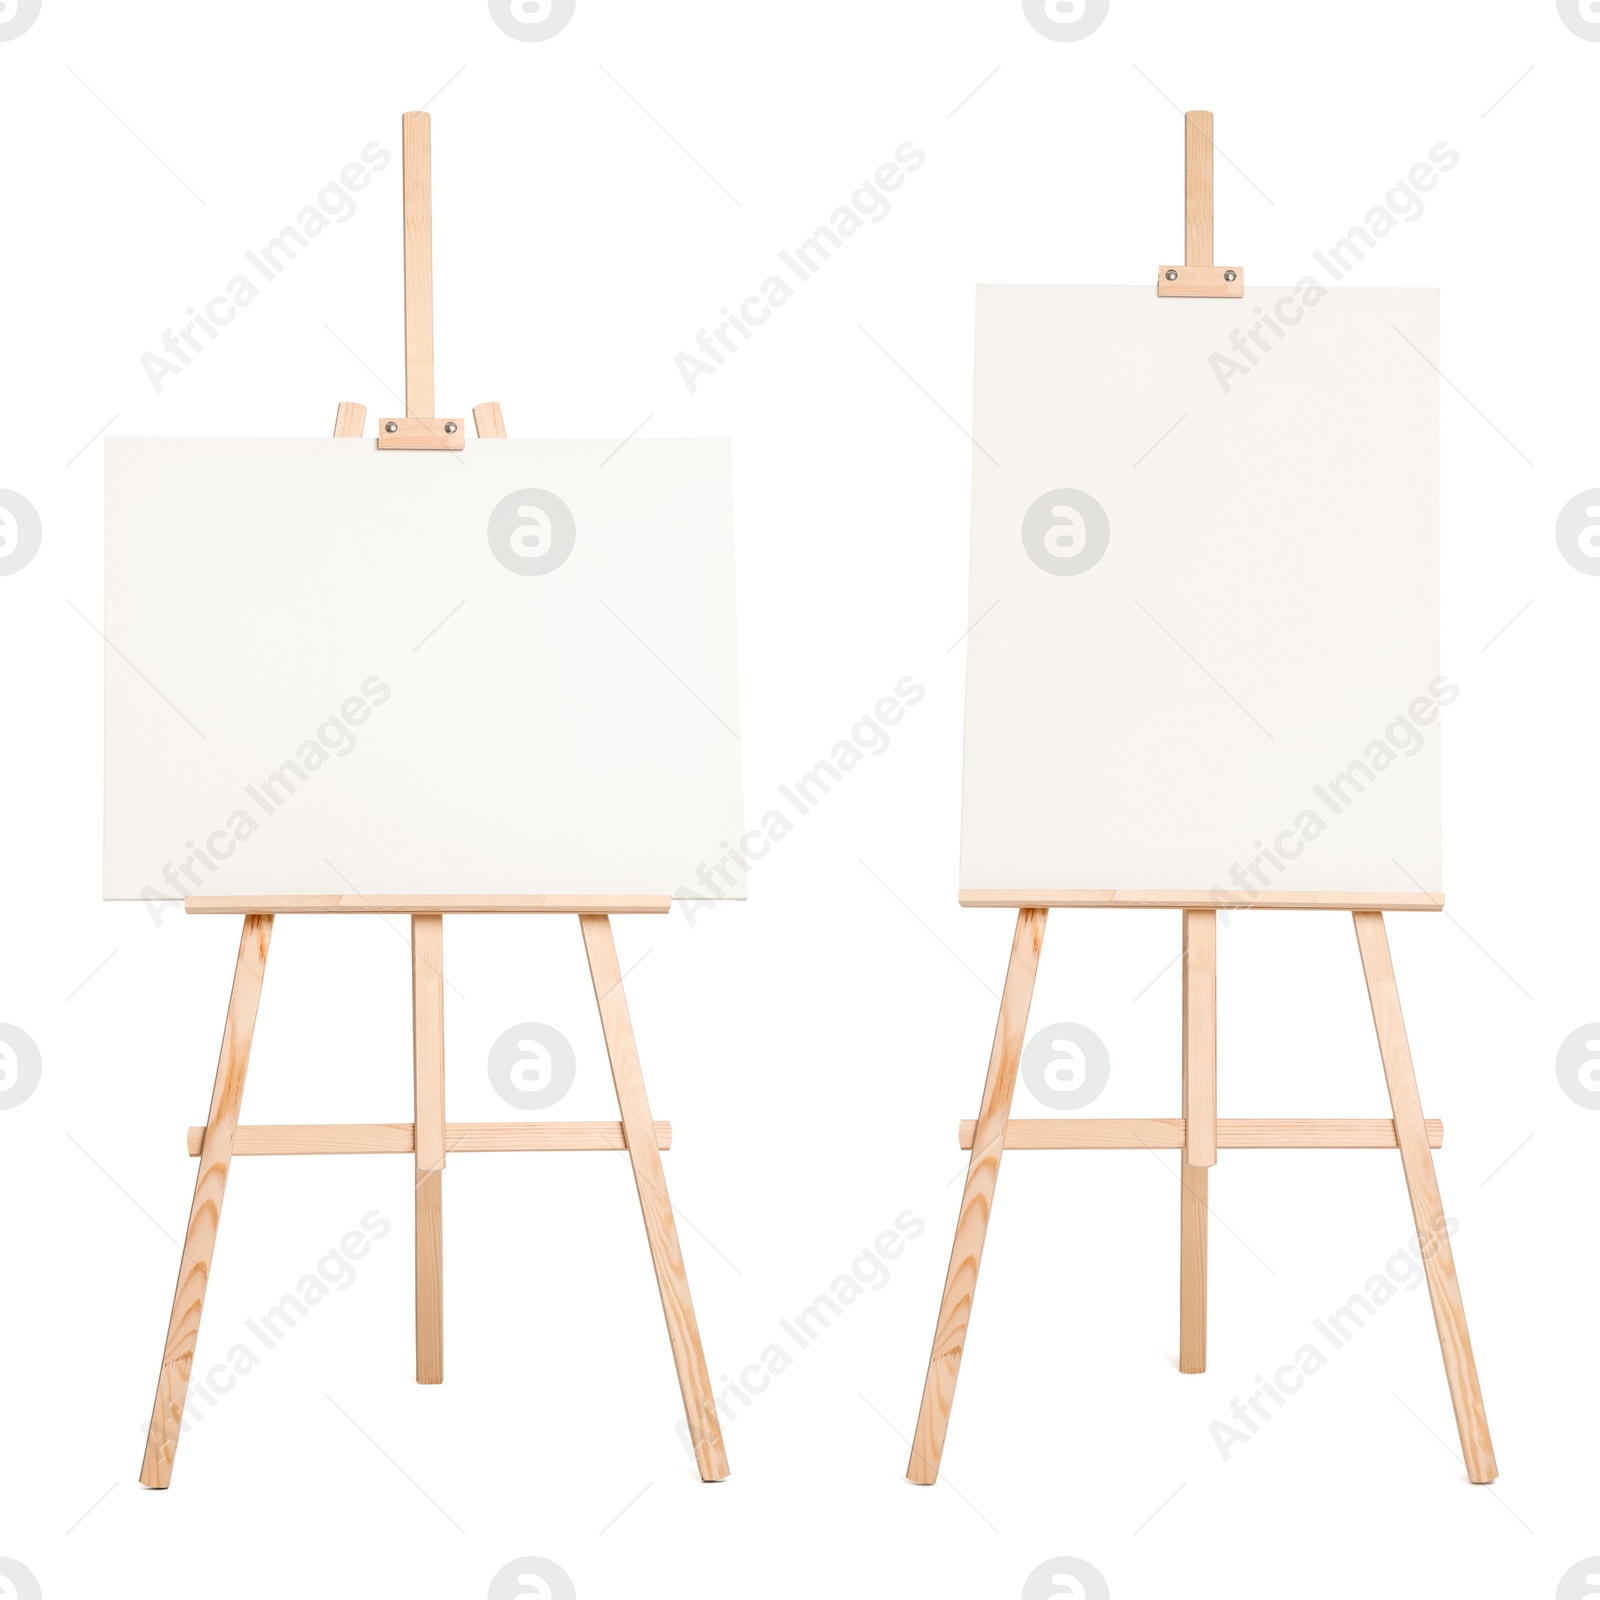 Image of Wooden easel with different canvases isolated on white